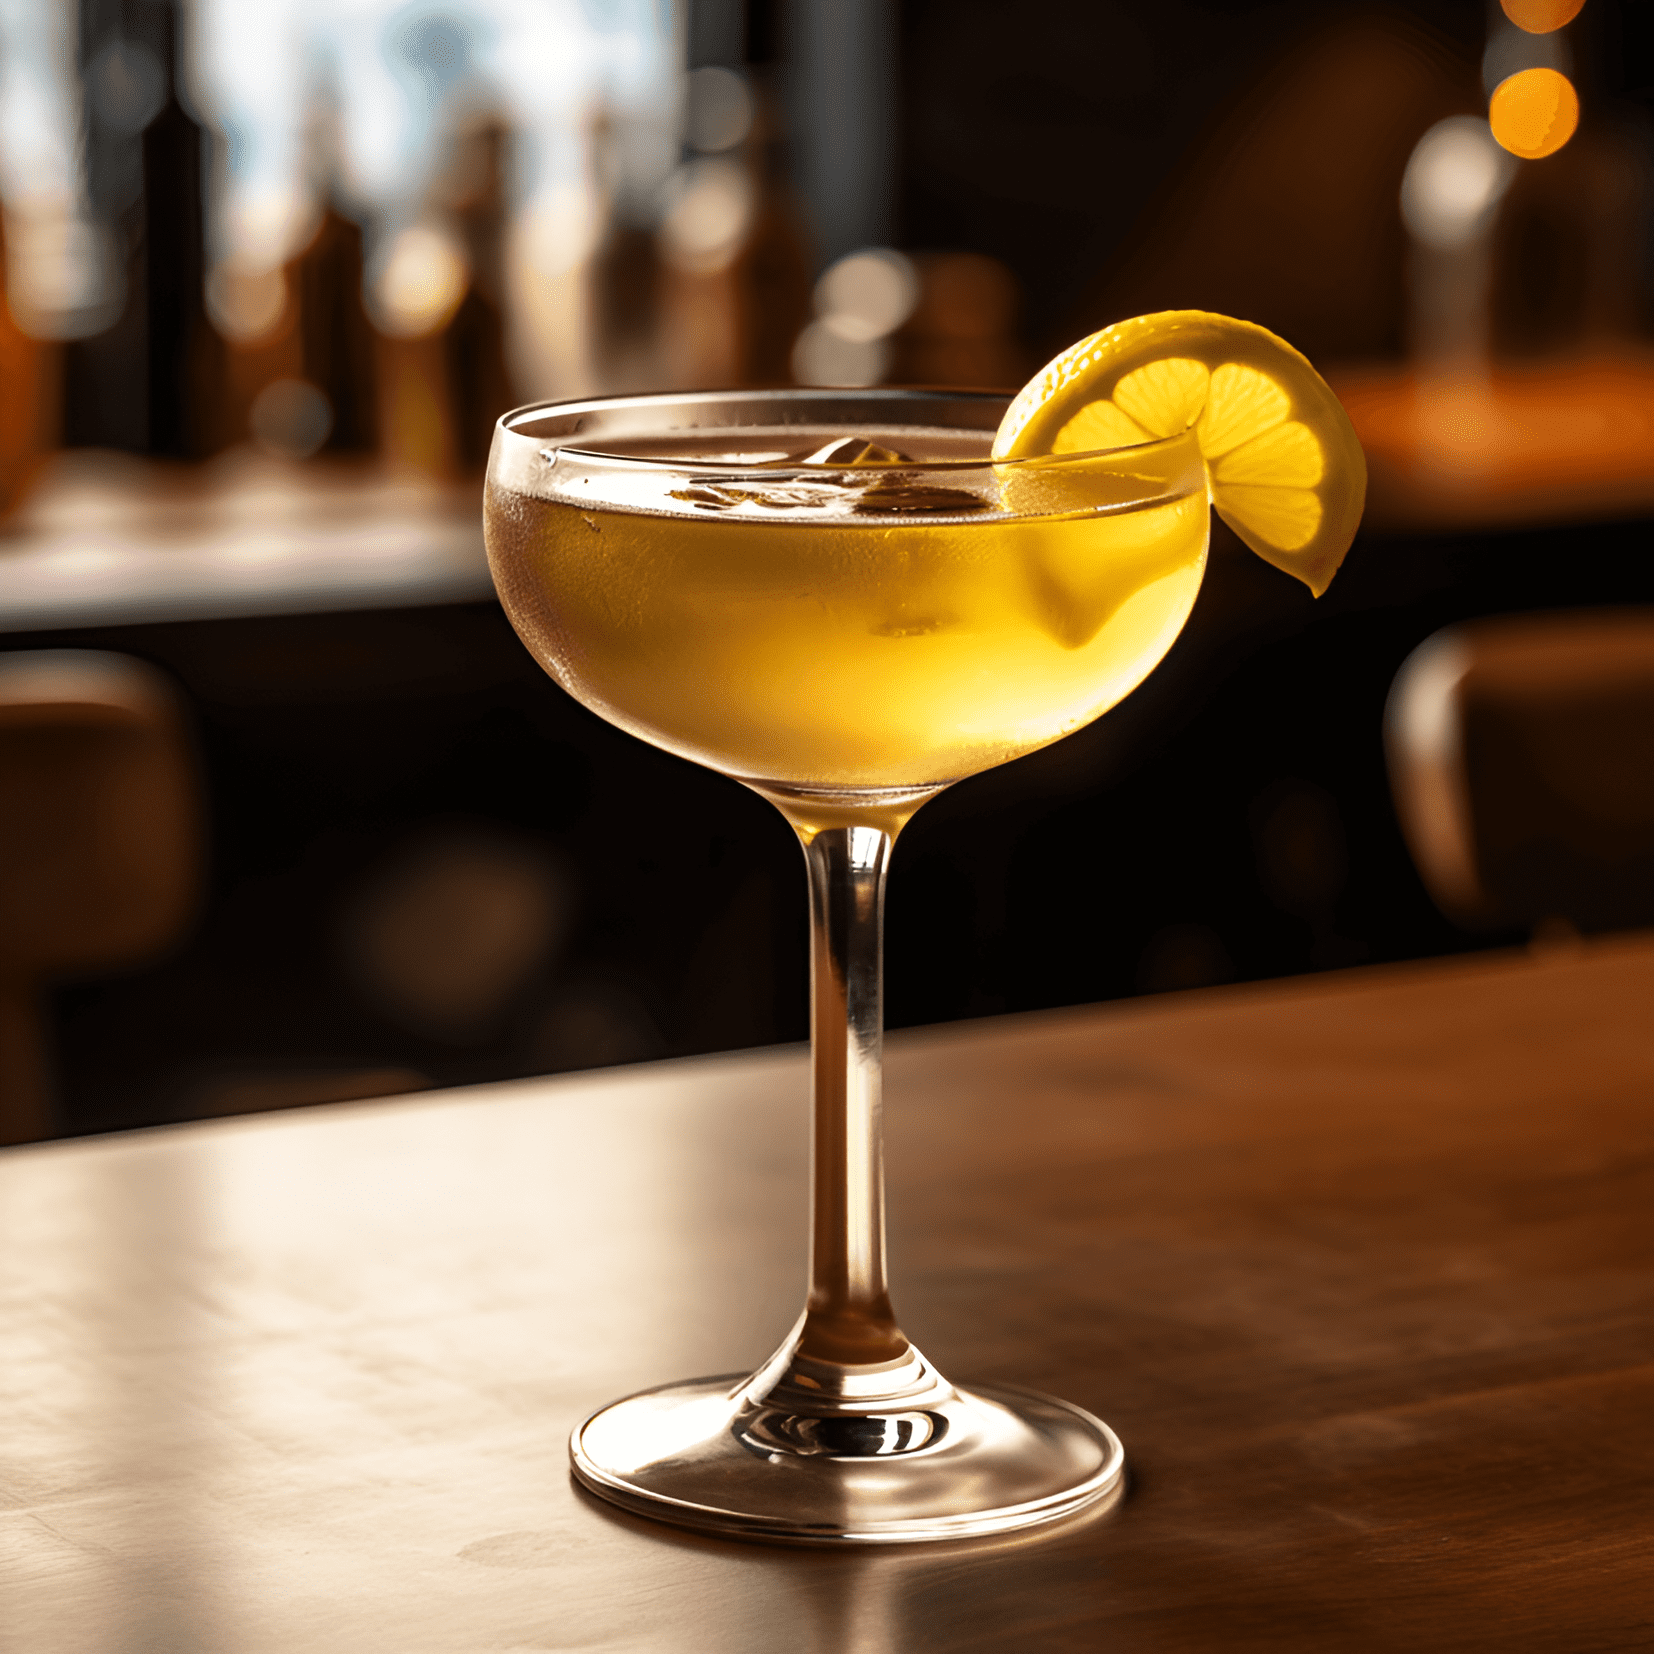 Frisco Cocktail Recipe - The Frisco cocktail is a well-balanced mix of sweet, sour, and strong flavors. The combination of rye whiskey and Bénédictine creates a rich, warm, and slightly spicy taste, while the lemon juice adds a refreshing citrus tang.